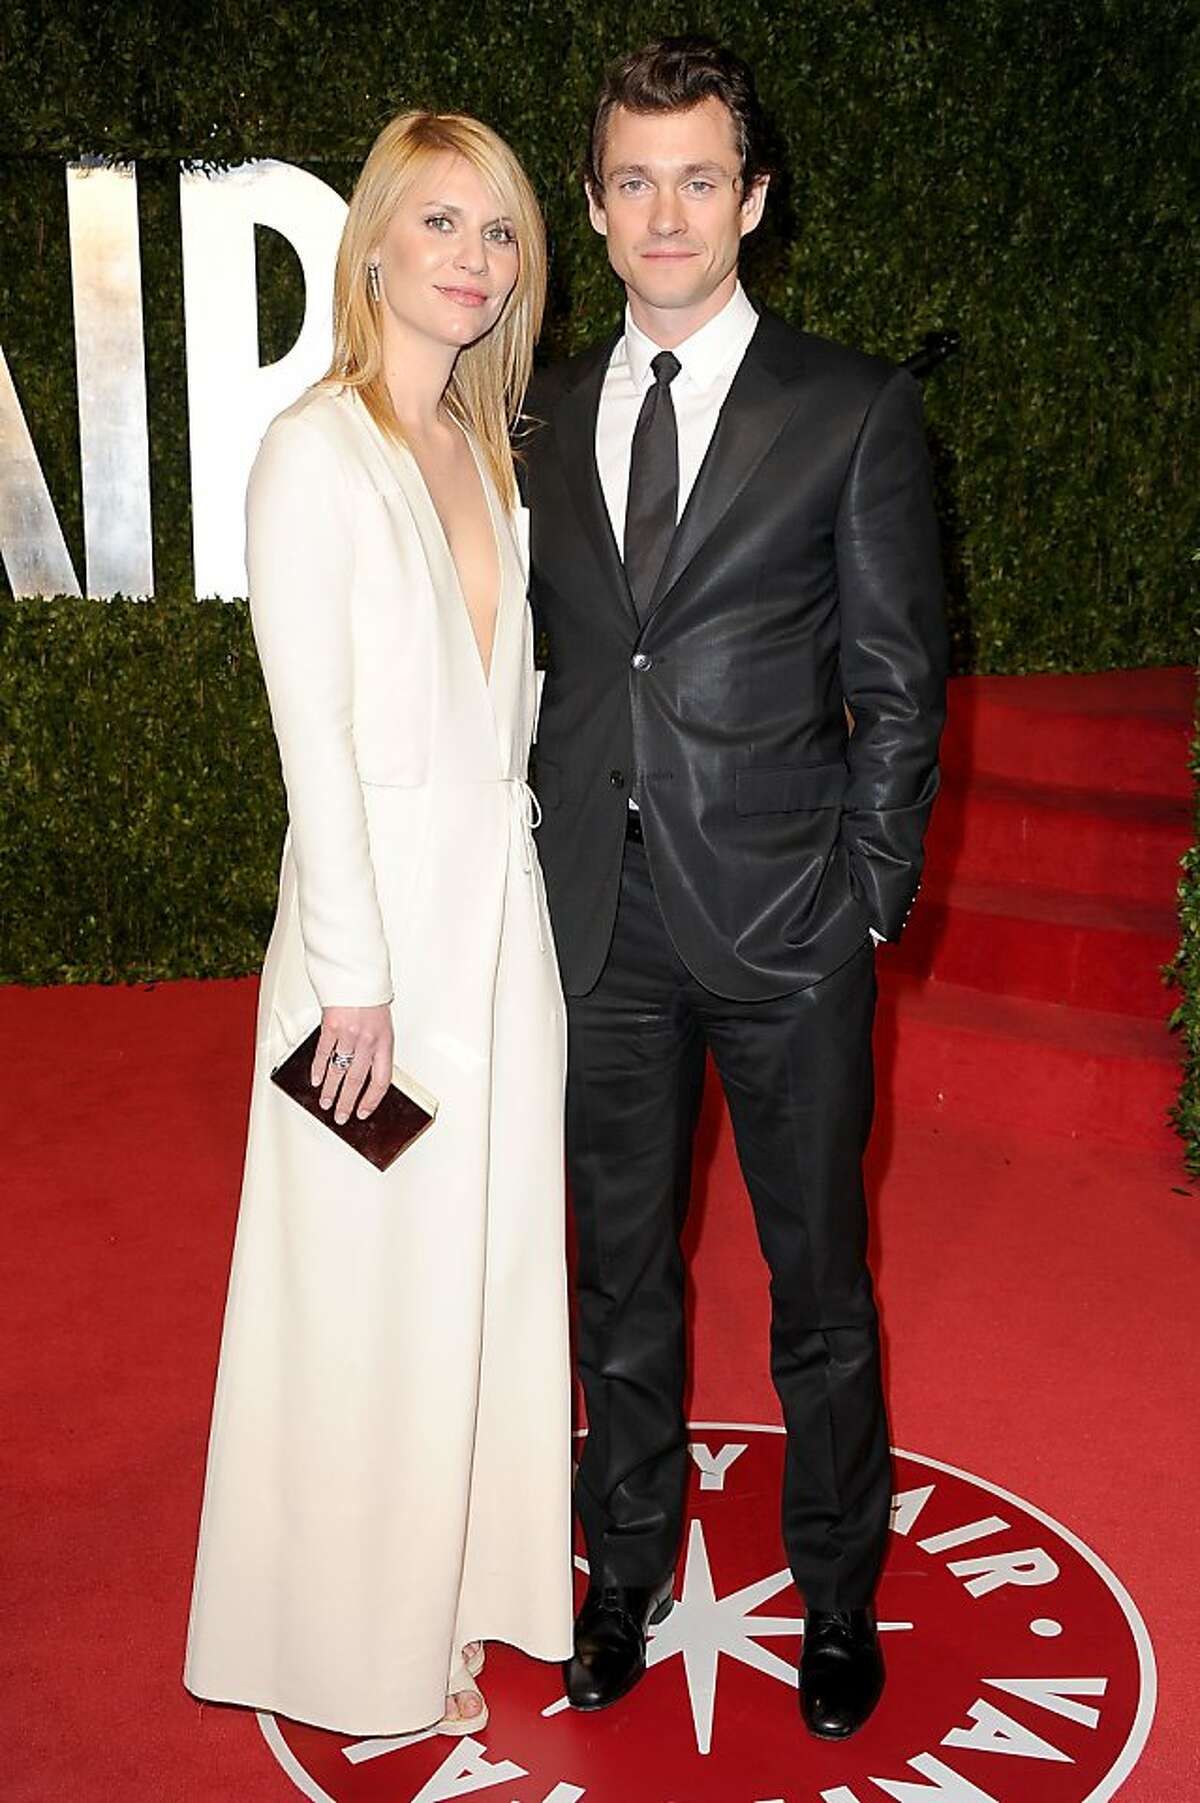 FILE â€“ JULY 5, 2012: Actors Claire Danes and Hugh Dancy have announced that she is expecting their first child. The couple wed in 2009. WEST HOLLYWOOD, CA - FEBRUARY 27: Actress Claire Danes and Actor Hugh Dancy arrive at the Vanity Fair Oscar party hosted by Graydon Carter held at Sunset Tower on February 27, 2011 in West Hollywood, California. (Photo by Pascal Le Segretain/Getty Images)